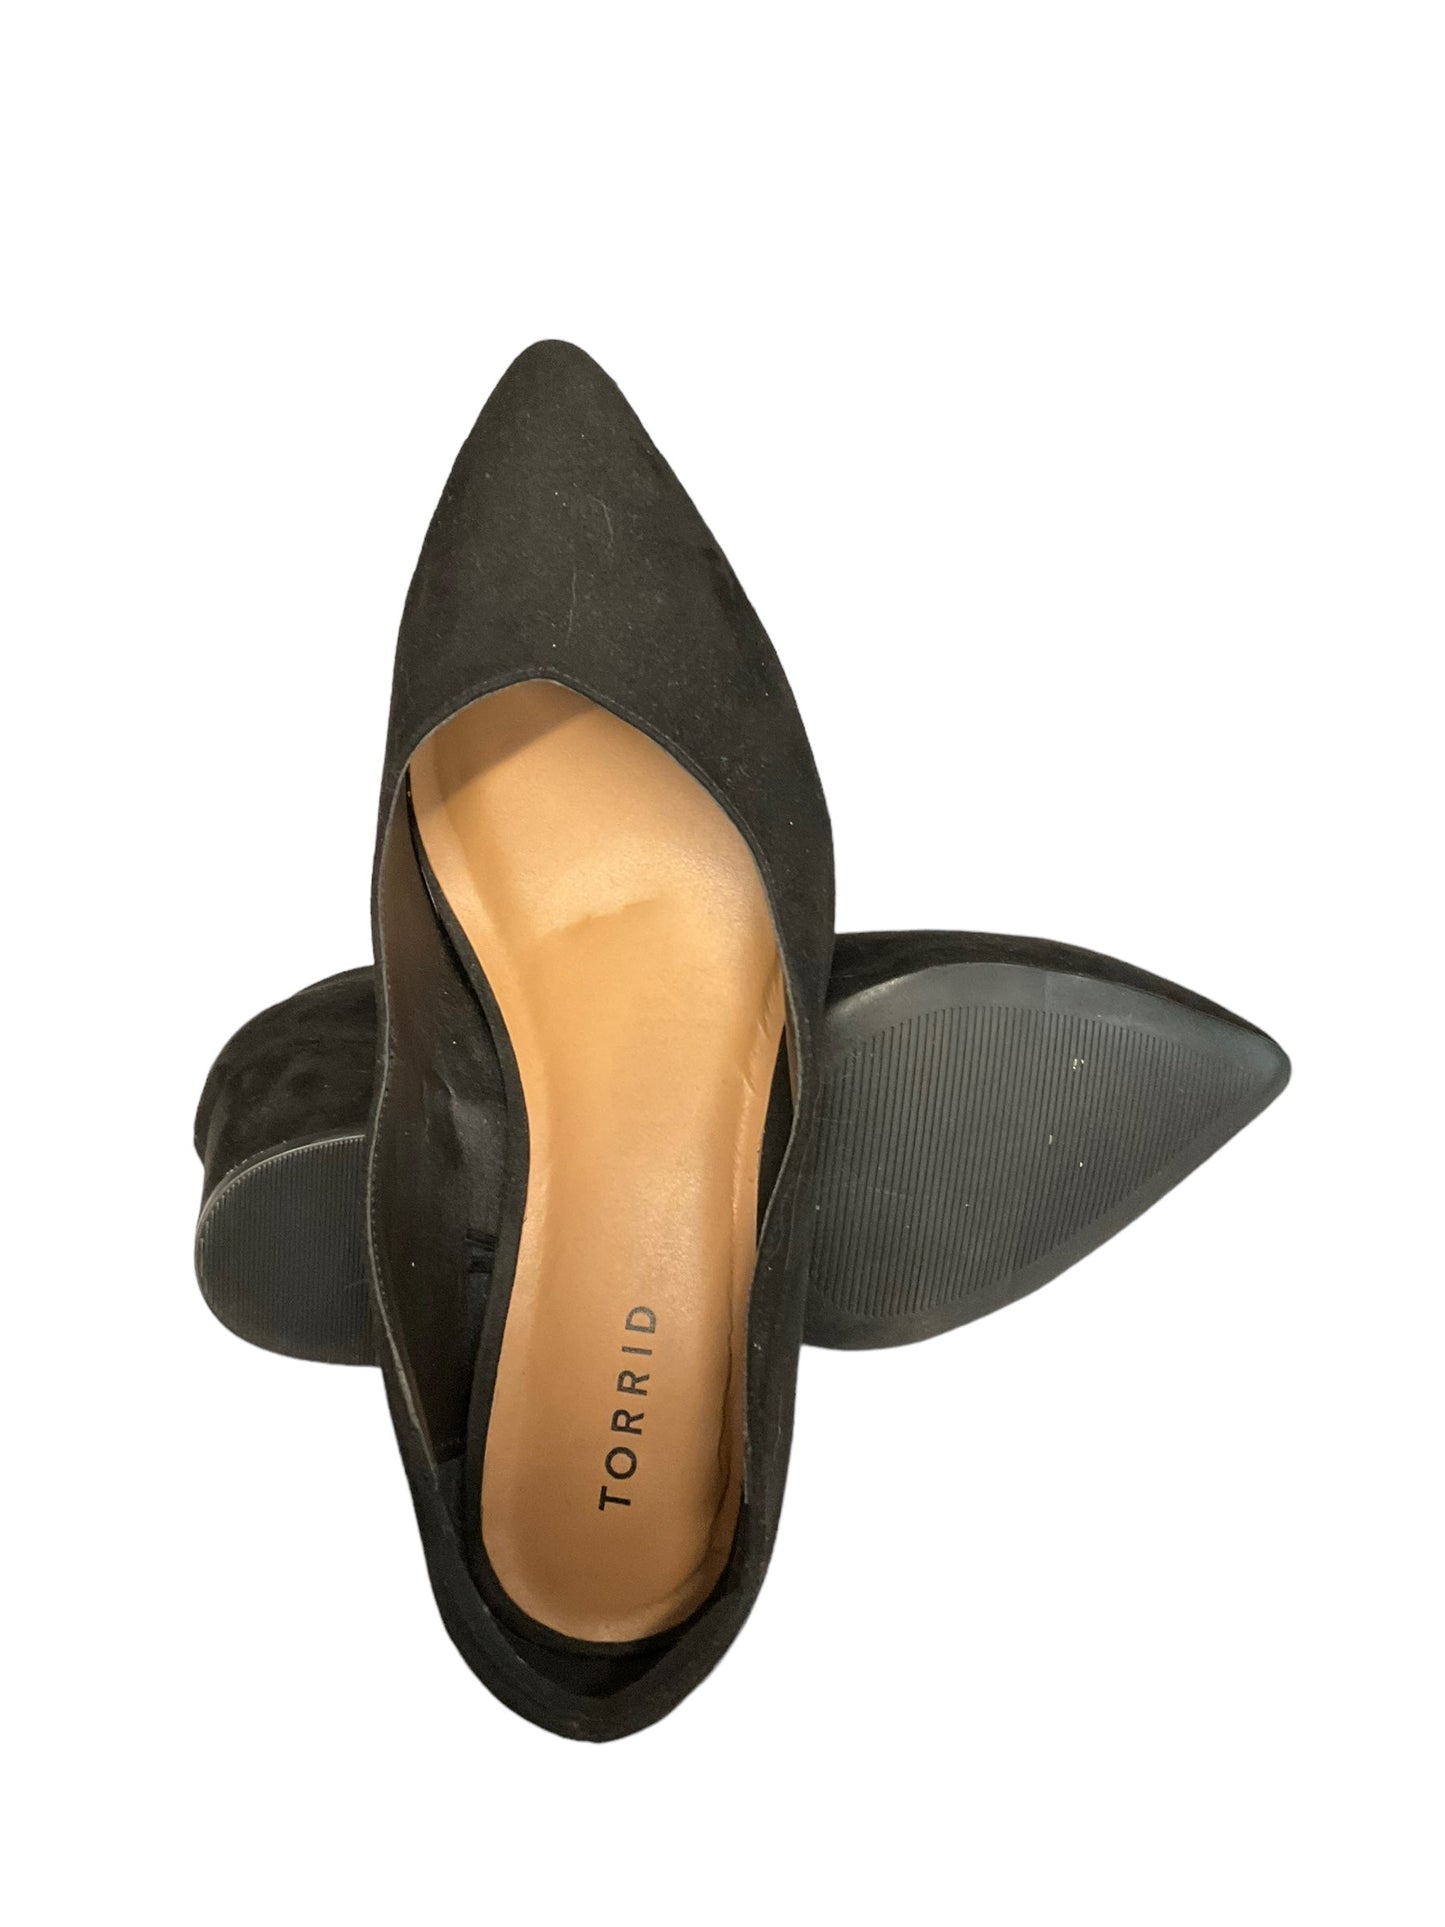 Shoes Flats By Torrid  Size: 8.5